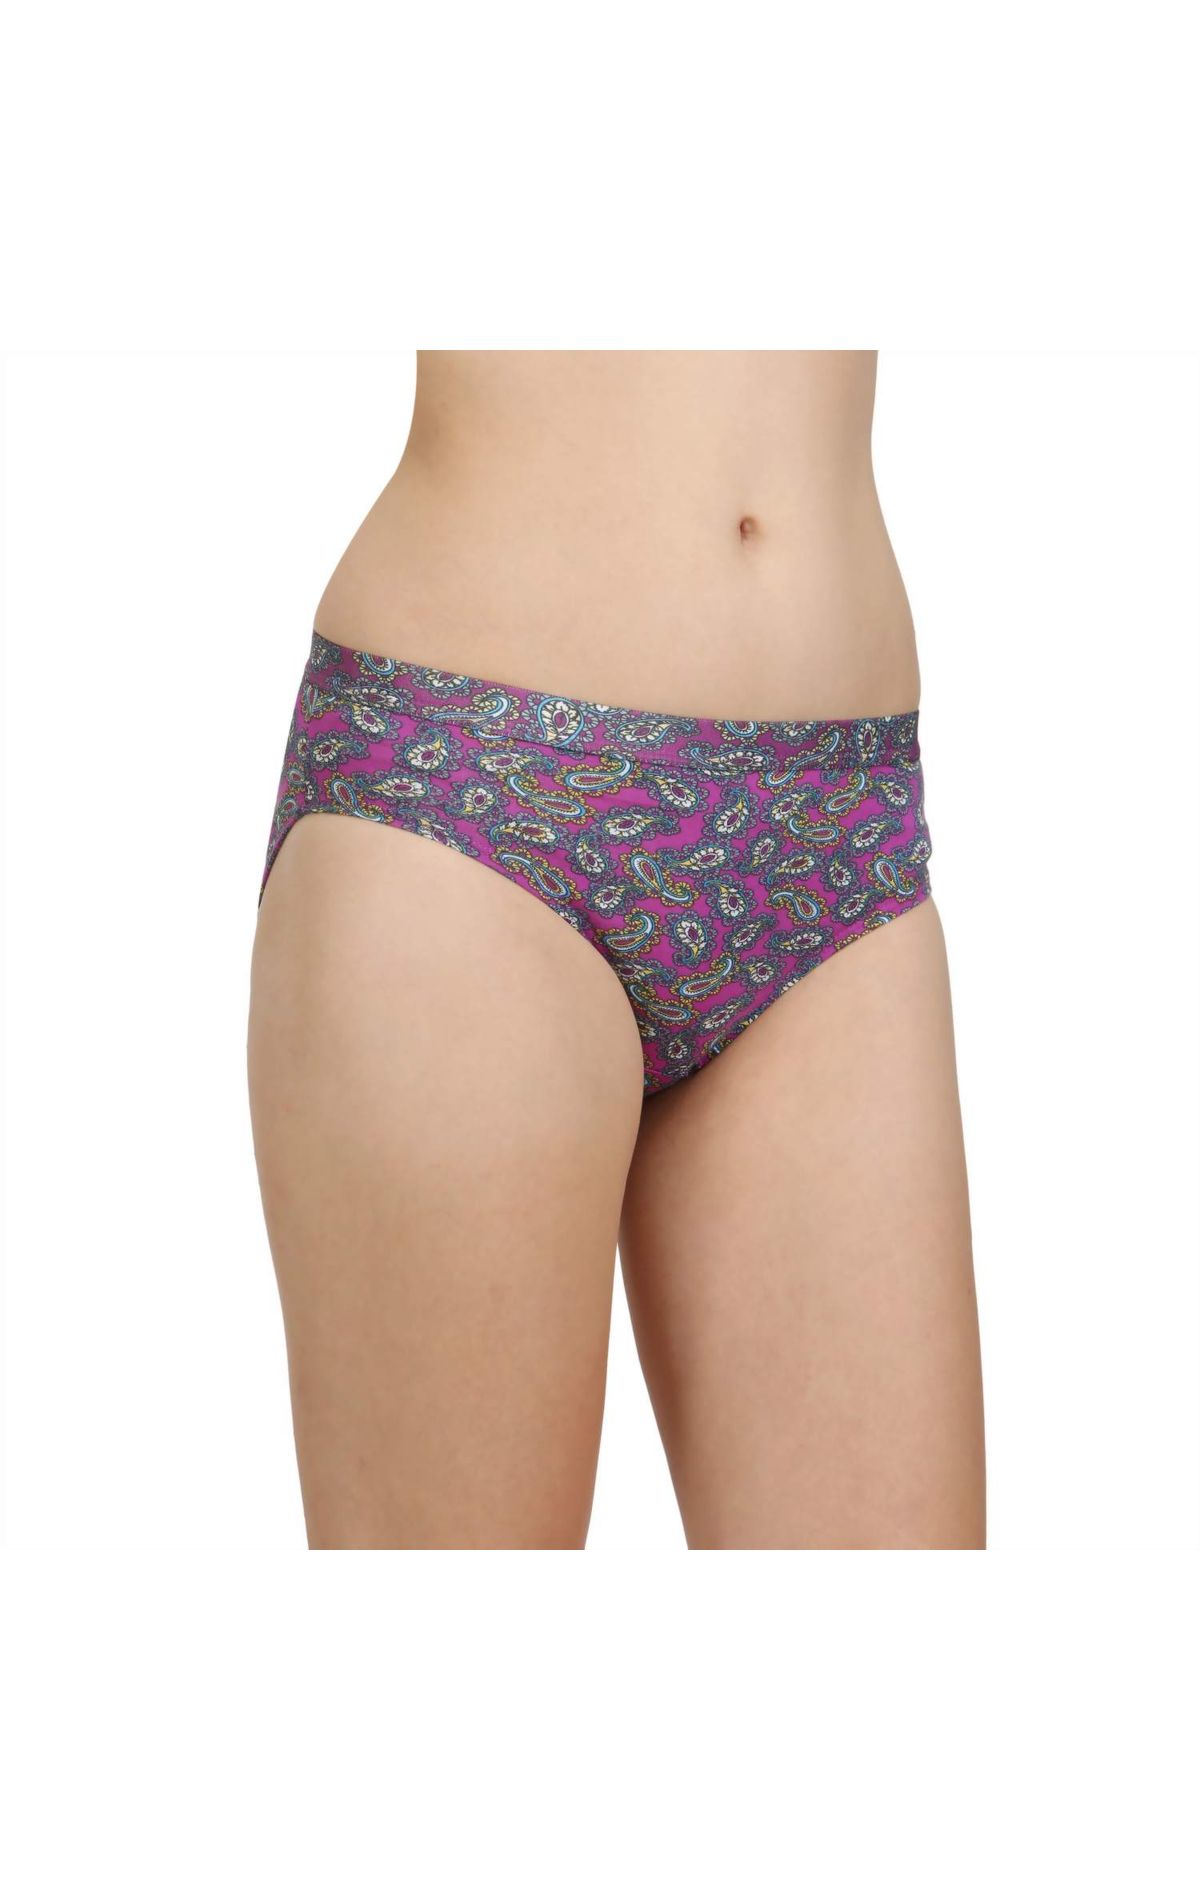 Pack Of 3 Bodycare Premium Printed Cotton Briefs In Assorted Colors, 3700-d